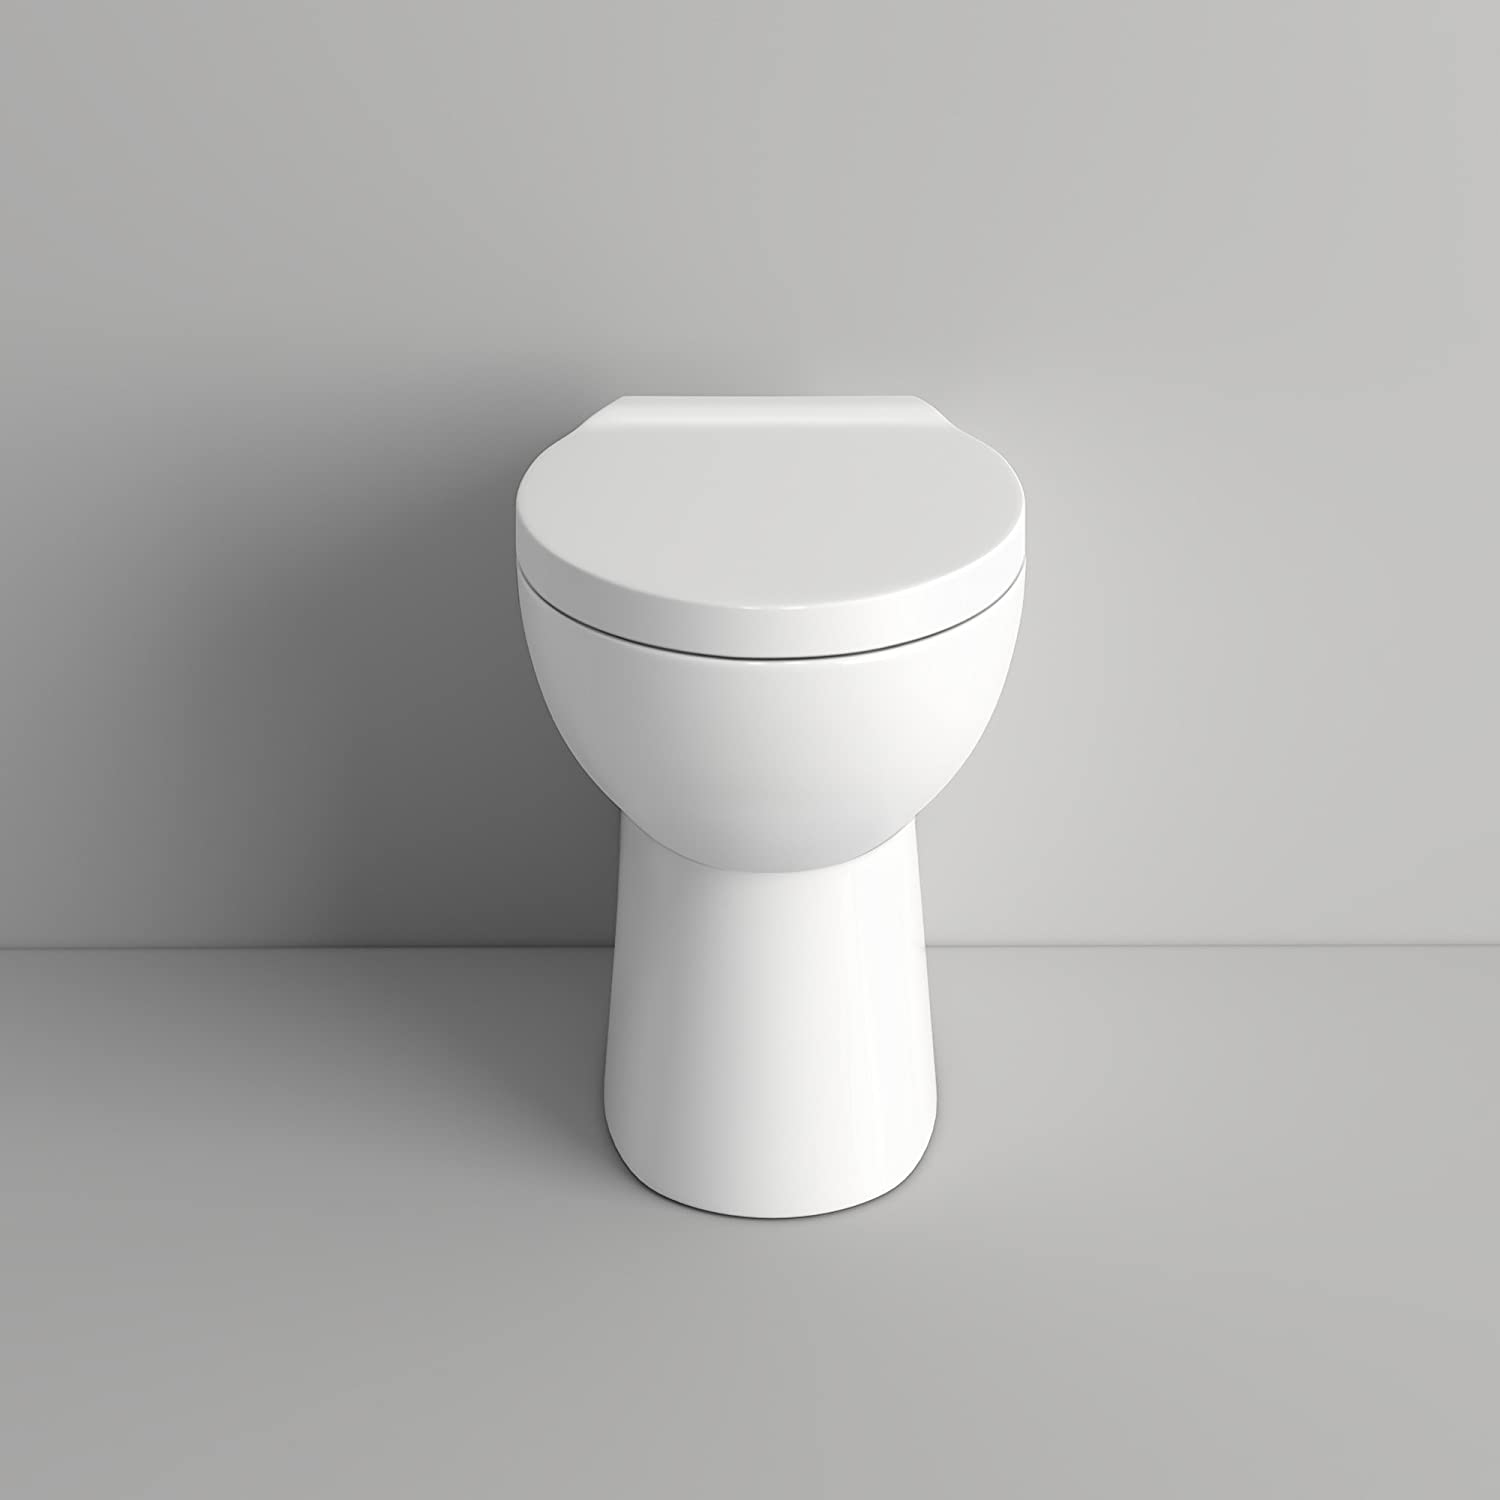 Modern WC Unit with Back to Wall Toilet in Gloss White. Ideal for UK bathrooms. Soft Close Seat included. Buy now at Bathroom4Less.